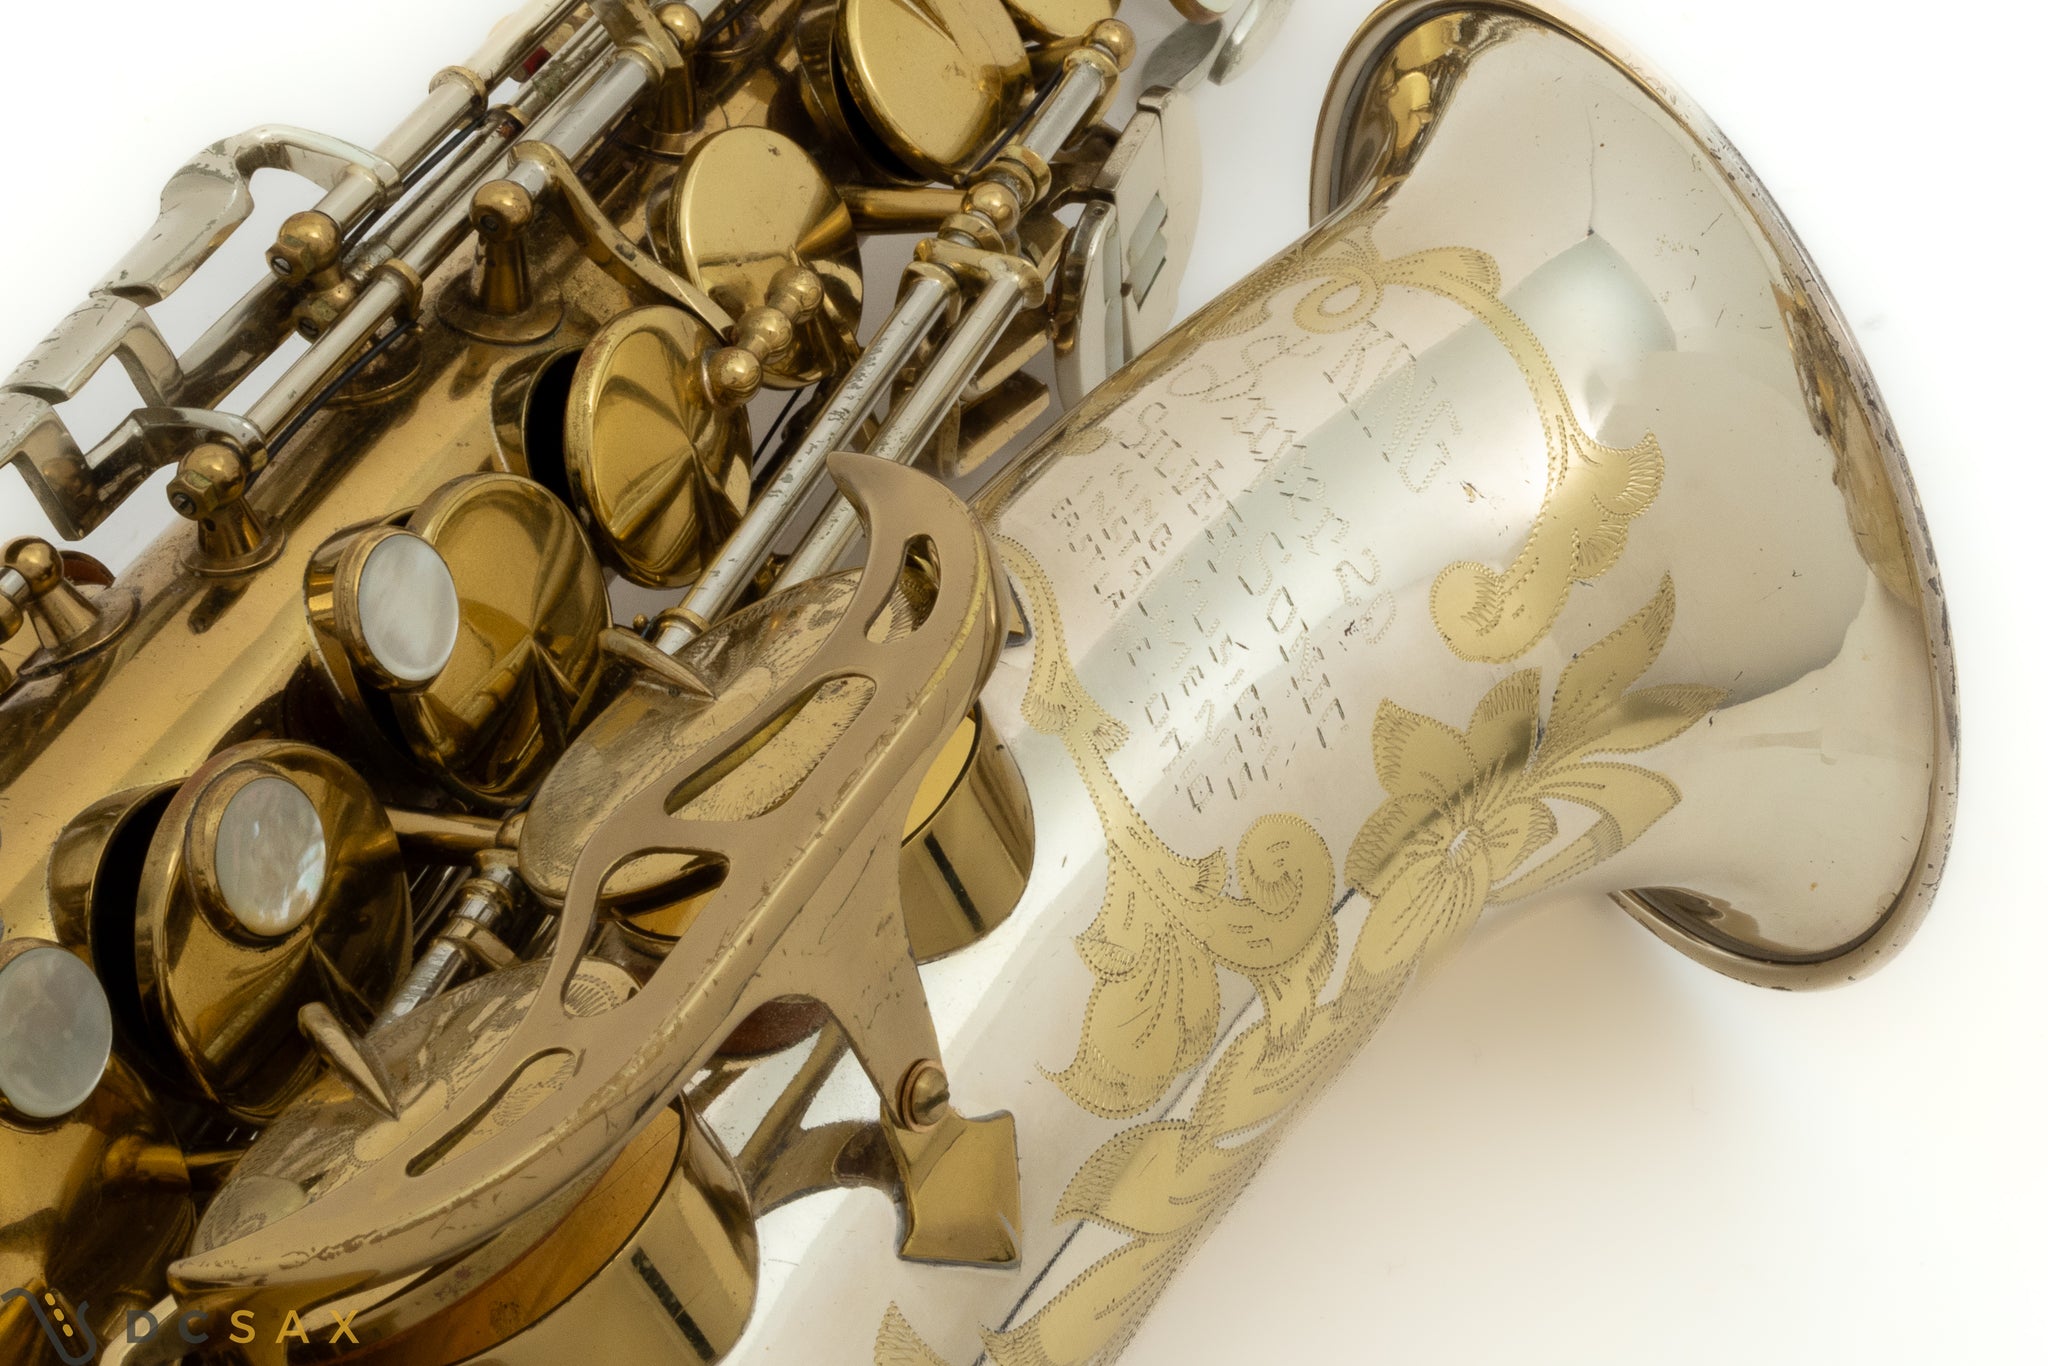 1969 King Silver Sonic Alto Saxophone with Gold Plate Inlay, Video Demo